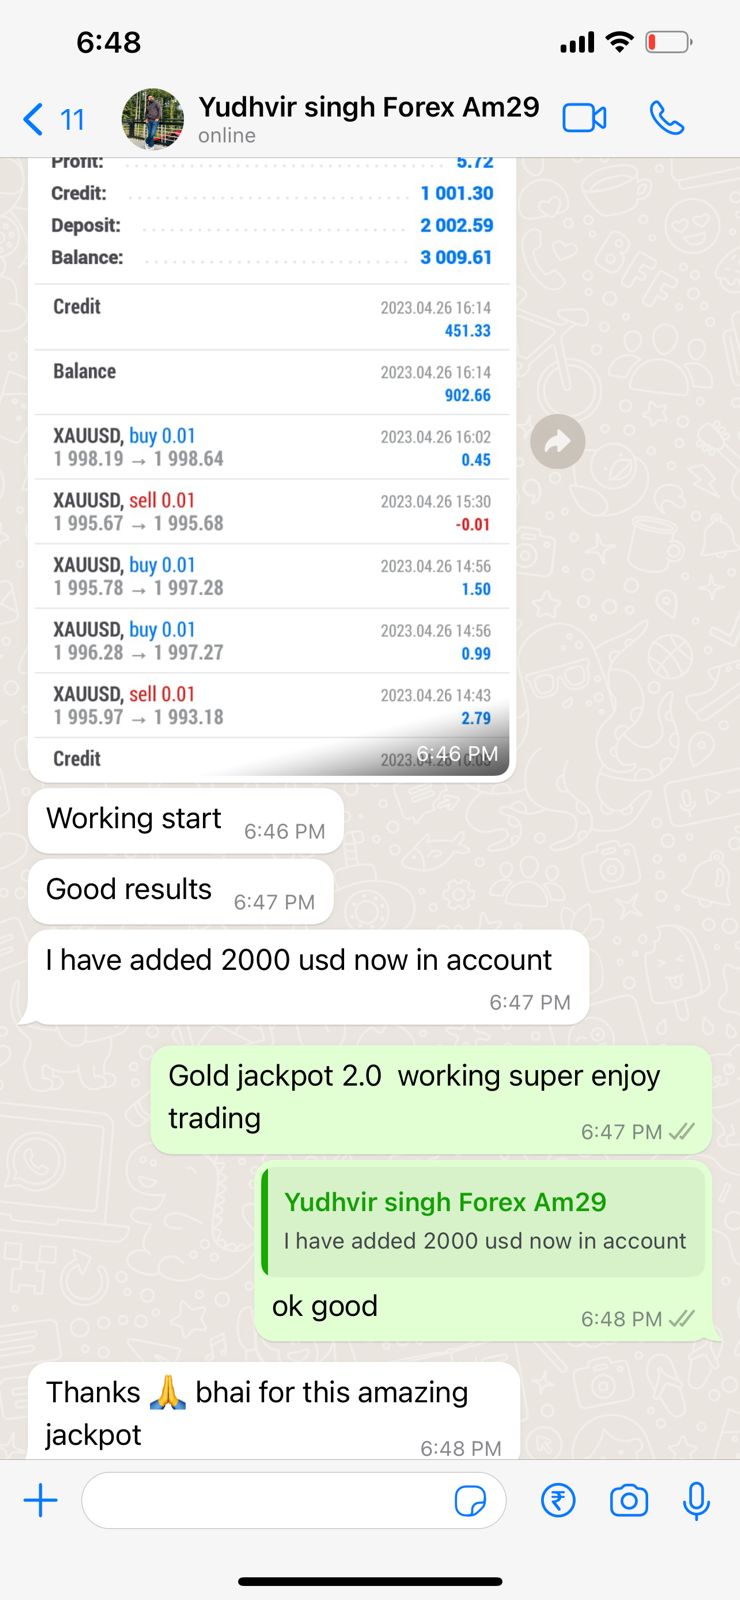 Experience consistent forex profits with the Forex Gold Jackpot Robot, an automated, low-risk trading tool ideal for all traders.